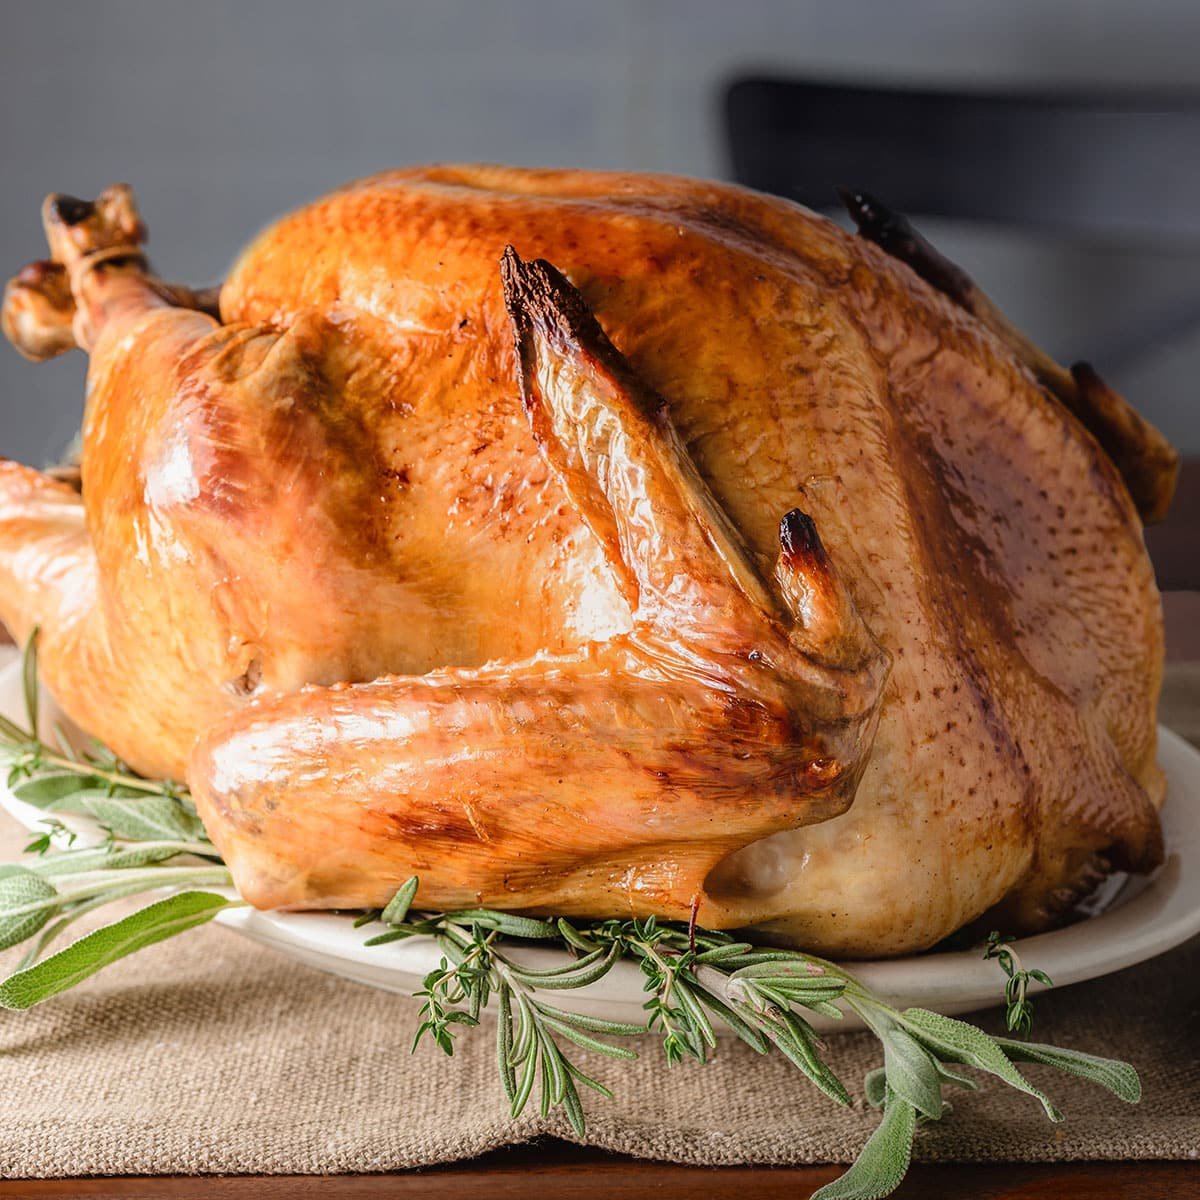 A roasted turkey that has crispy skin and a deep brown color, on a large platter surrounded by fresh sage leaves.